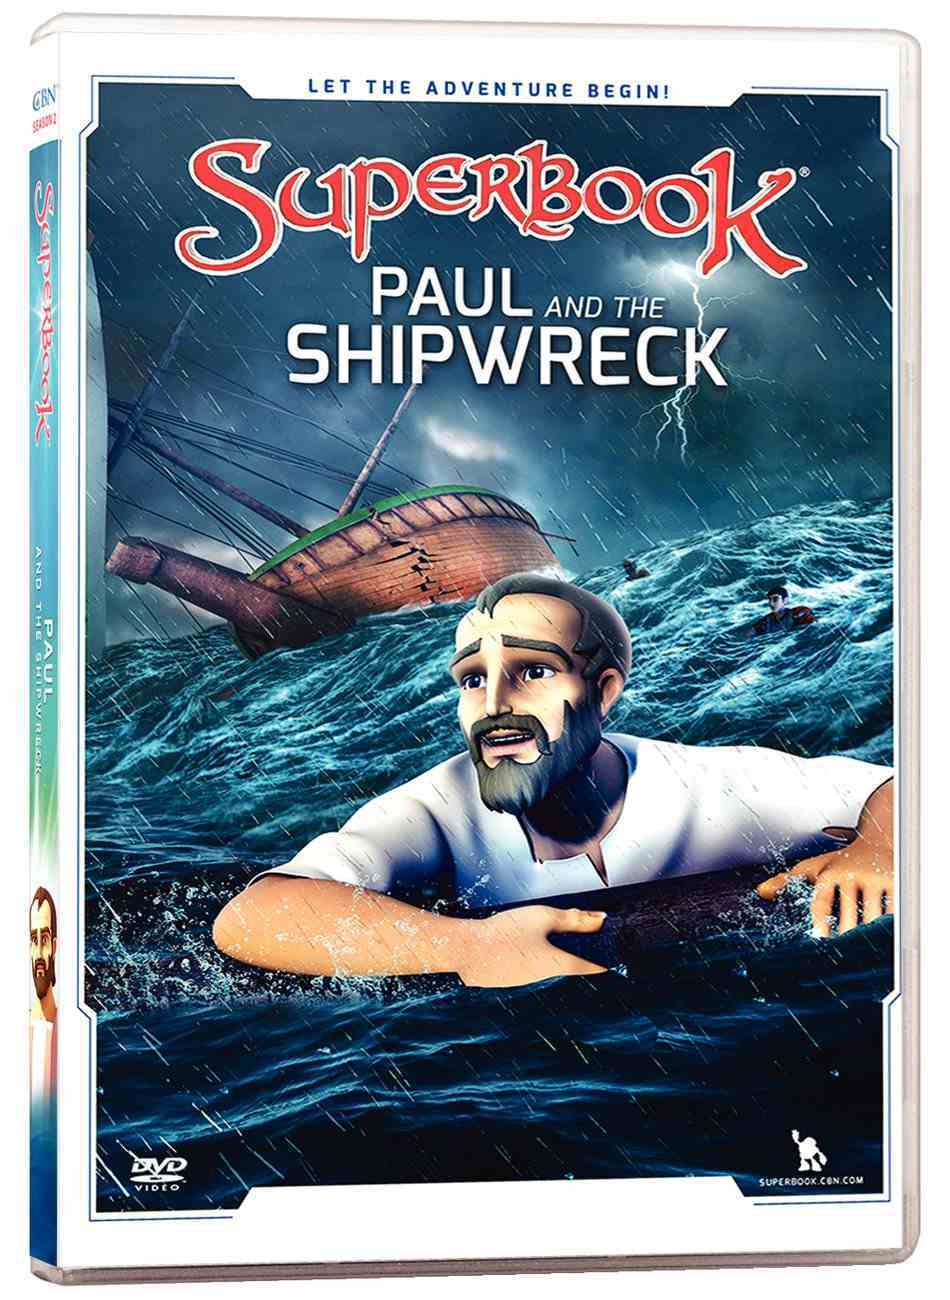 Paul and the Shipwreck (#07 in Superbook Dvd Series Season 02) DVD